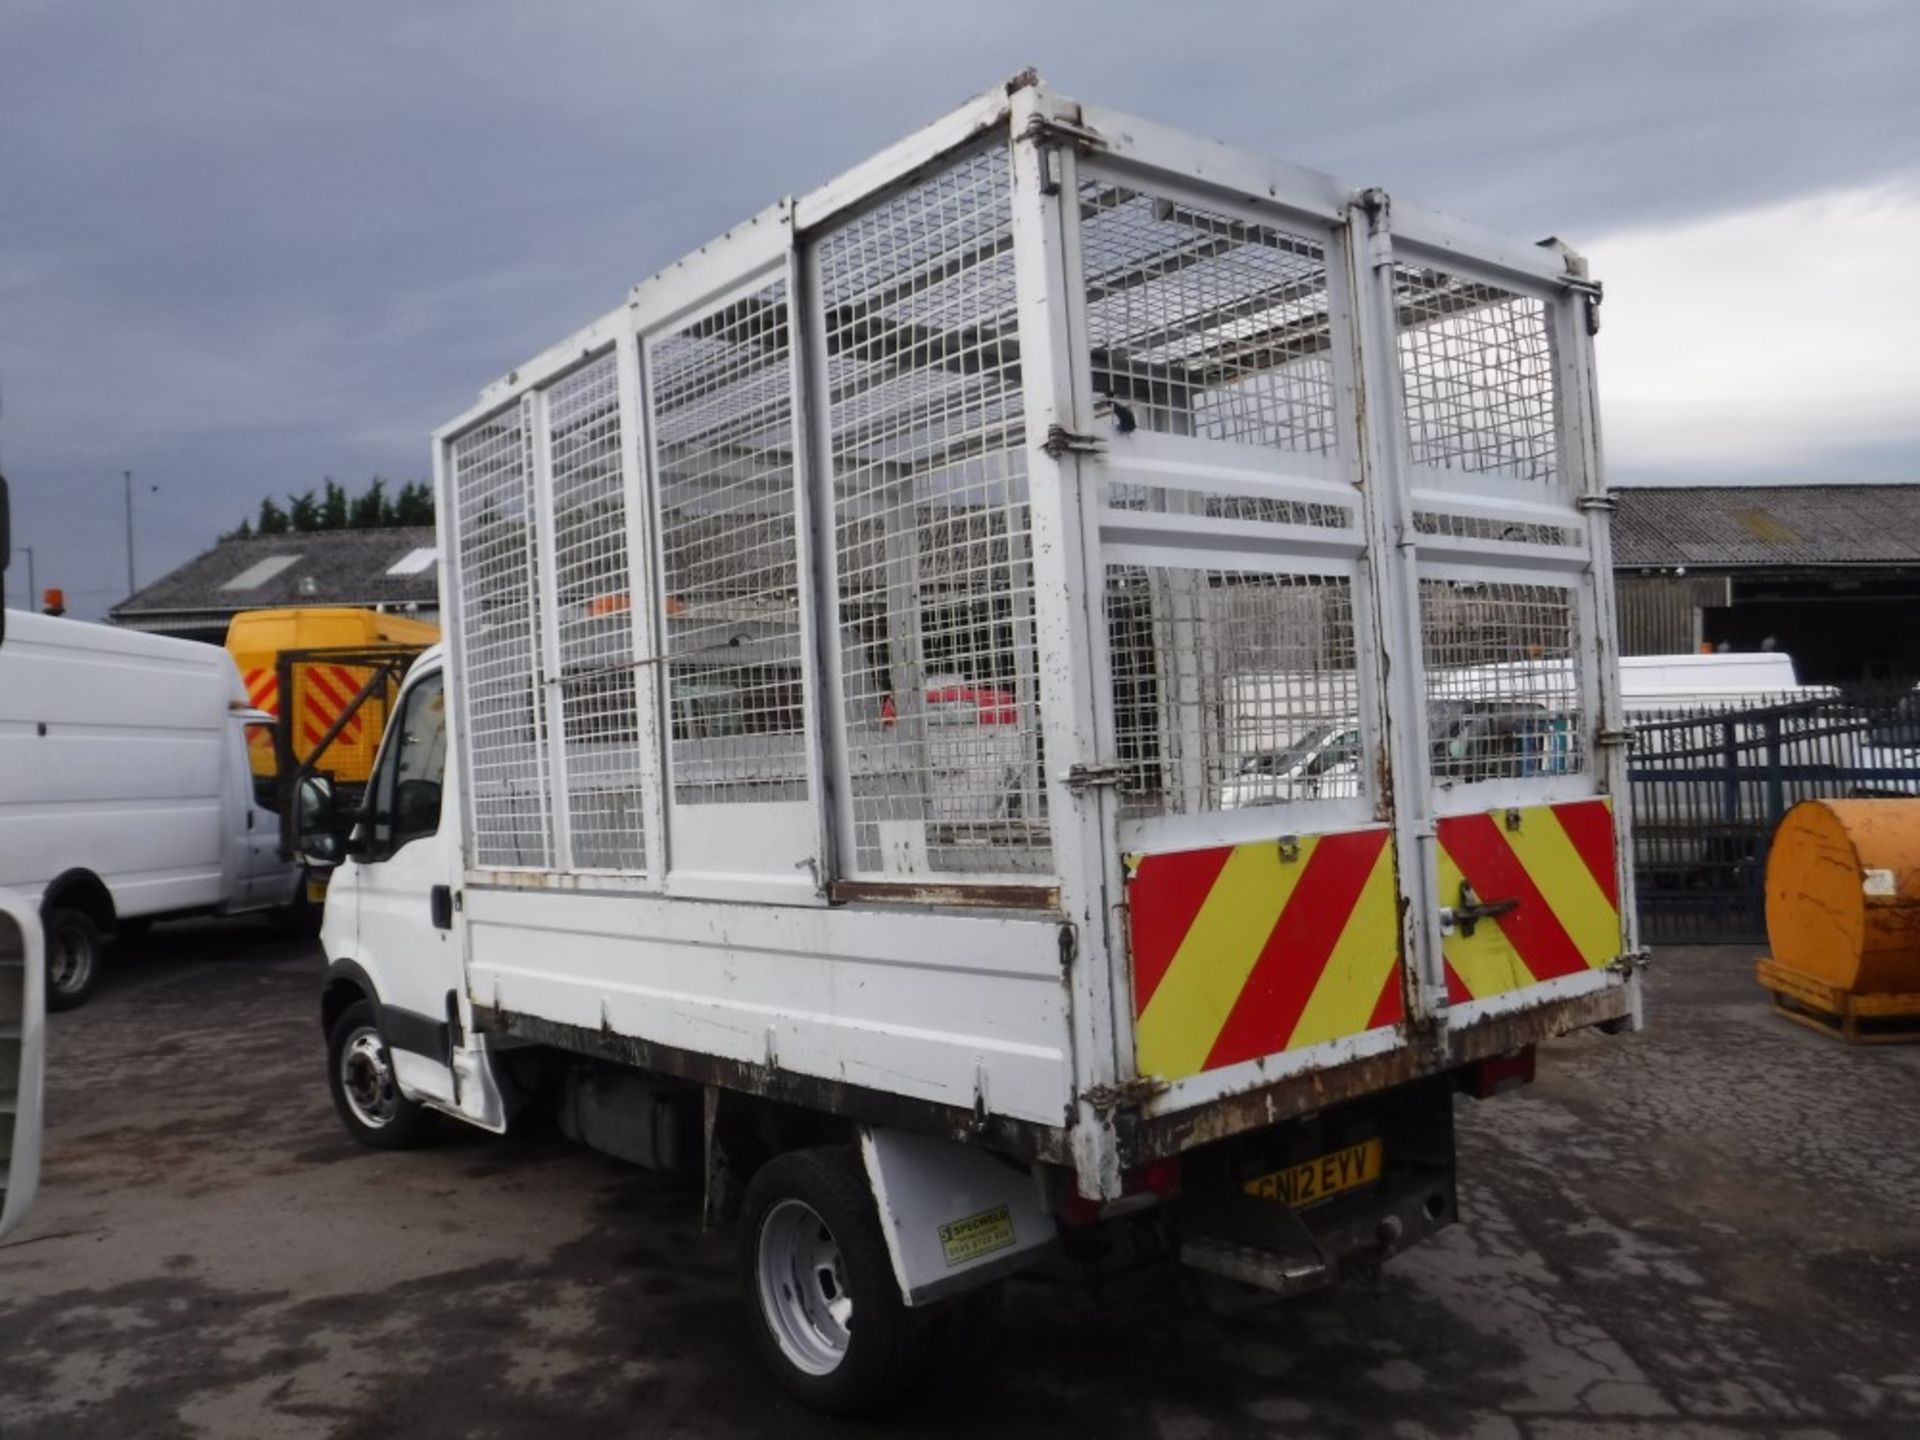 12 reg IVECO DAILY 35C11 MWB CAGED TIPPER, 1ST REG 04/12, TEST 04/19, 102241M, V5 HERE, 1 FORMER - Image 3 of 5